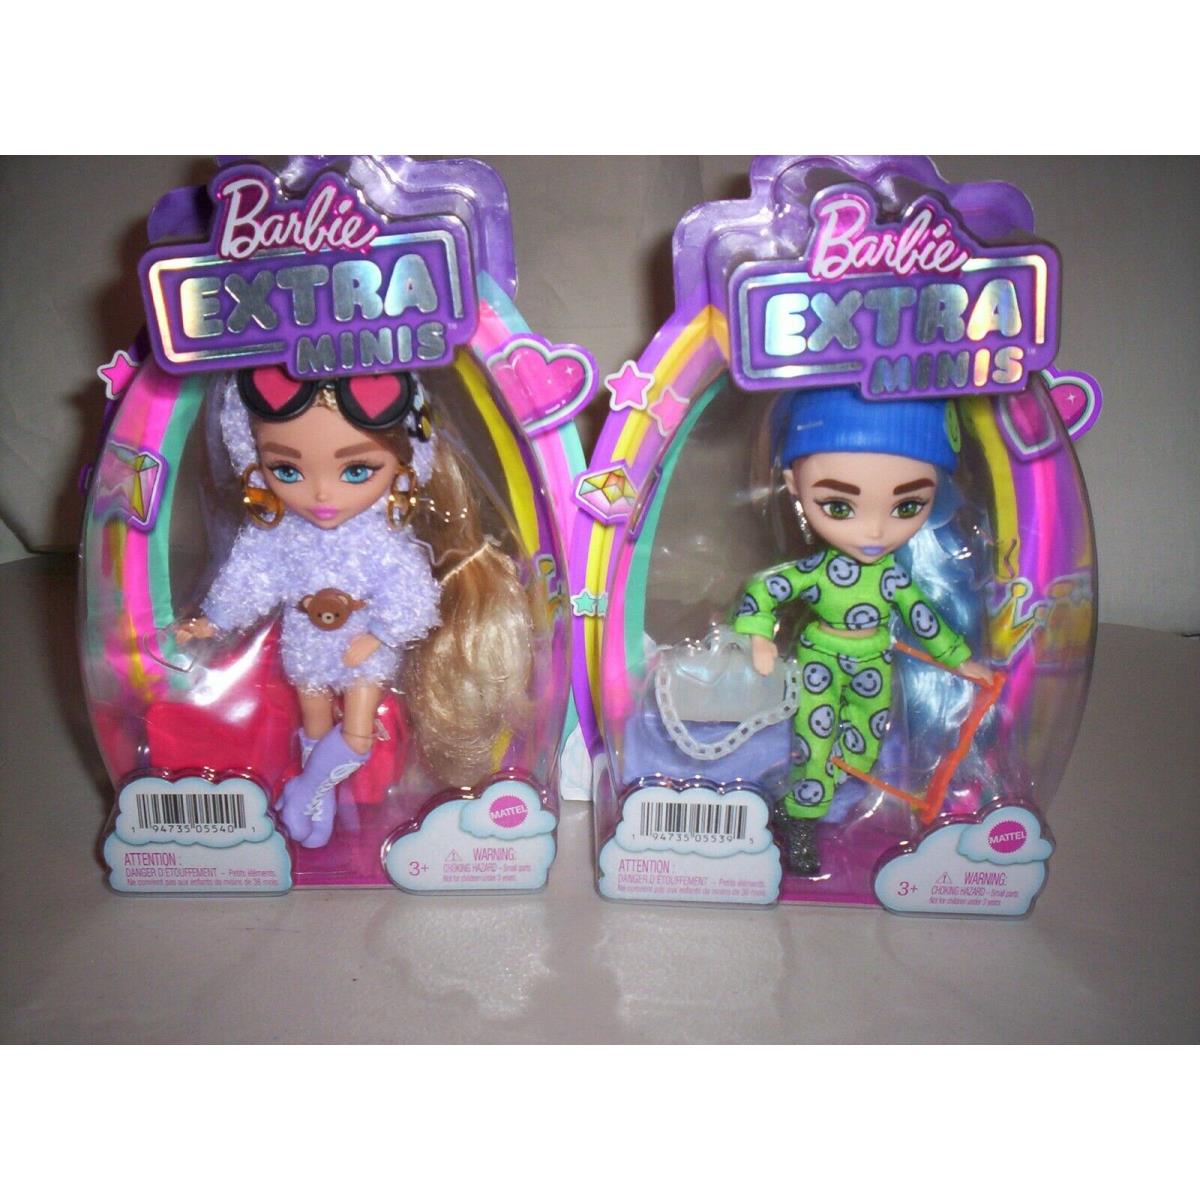 Set of 2 - 2021 Barbie Extra Minis Dolls Purple and Smiley Face